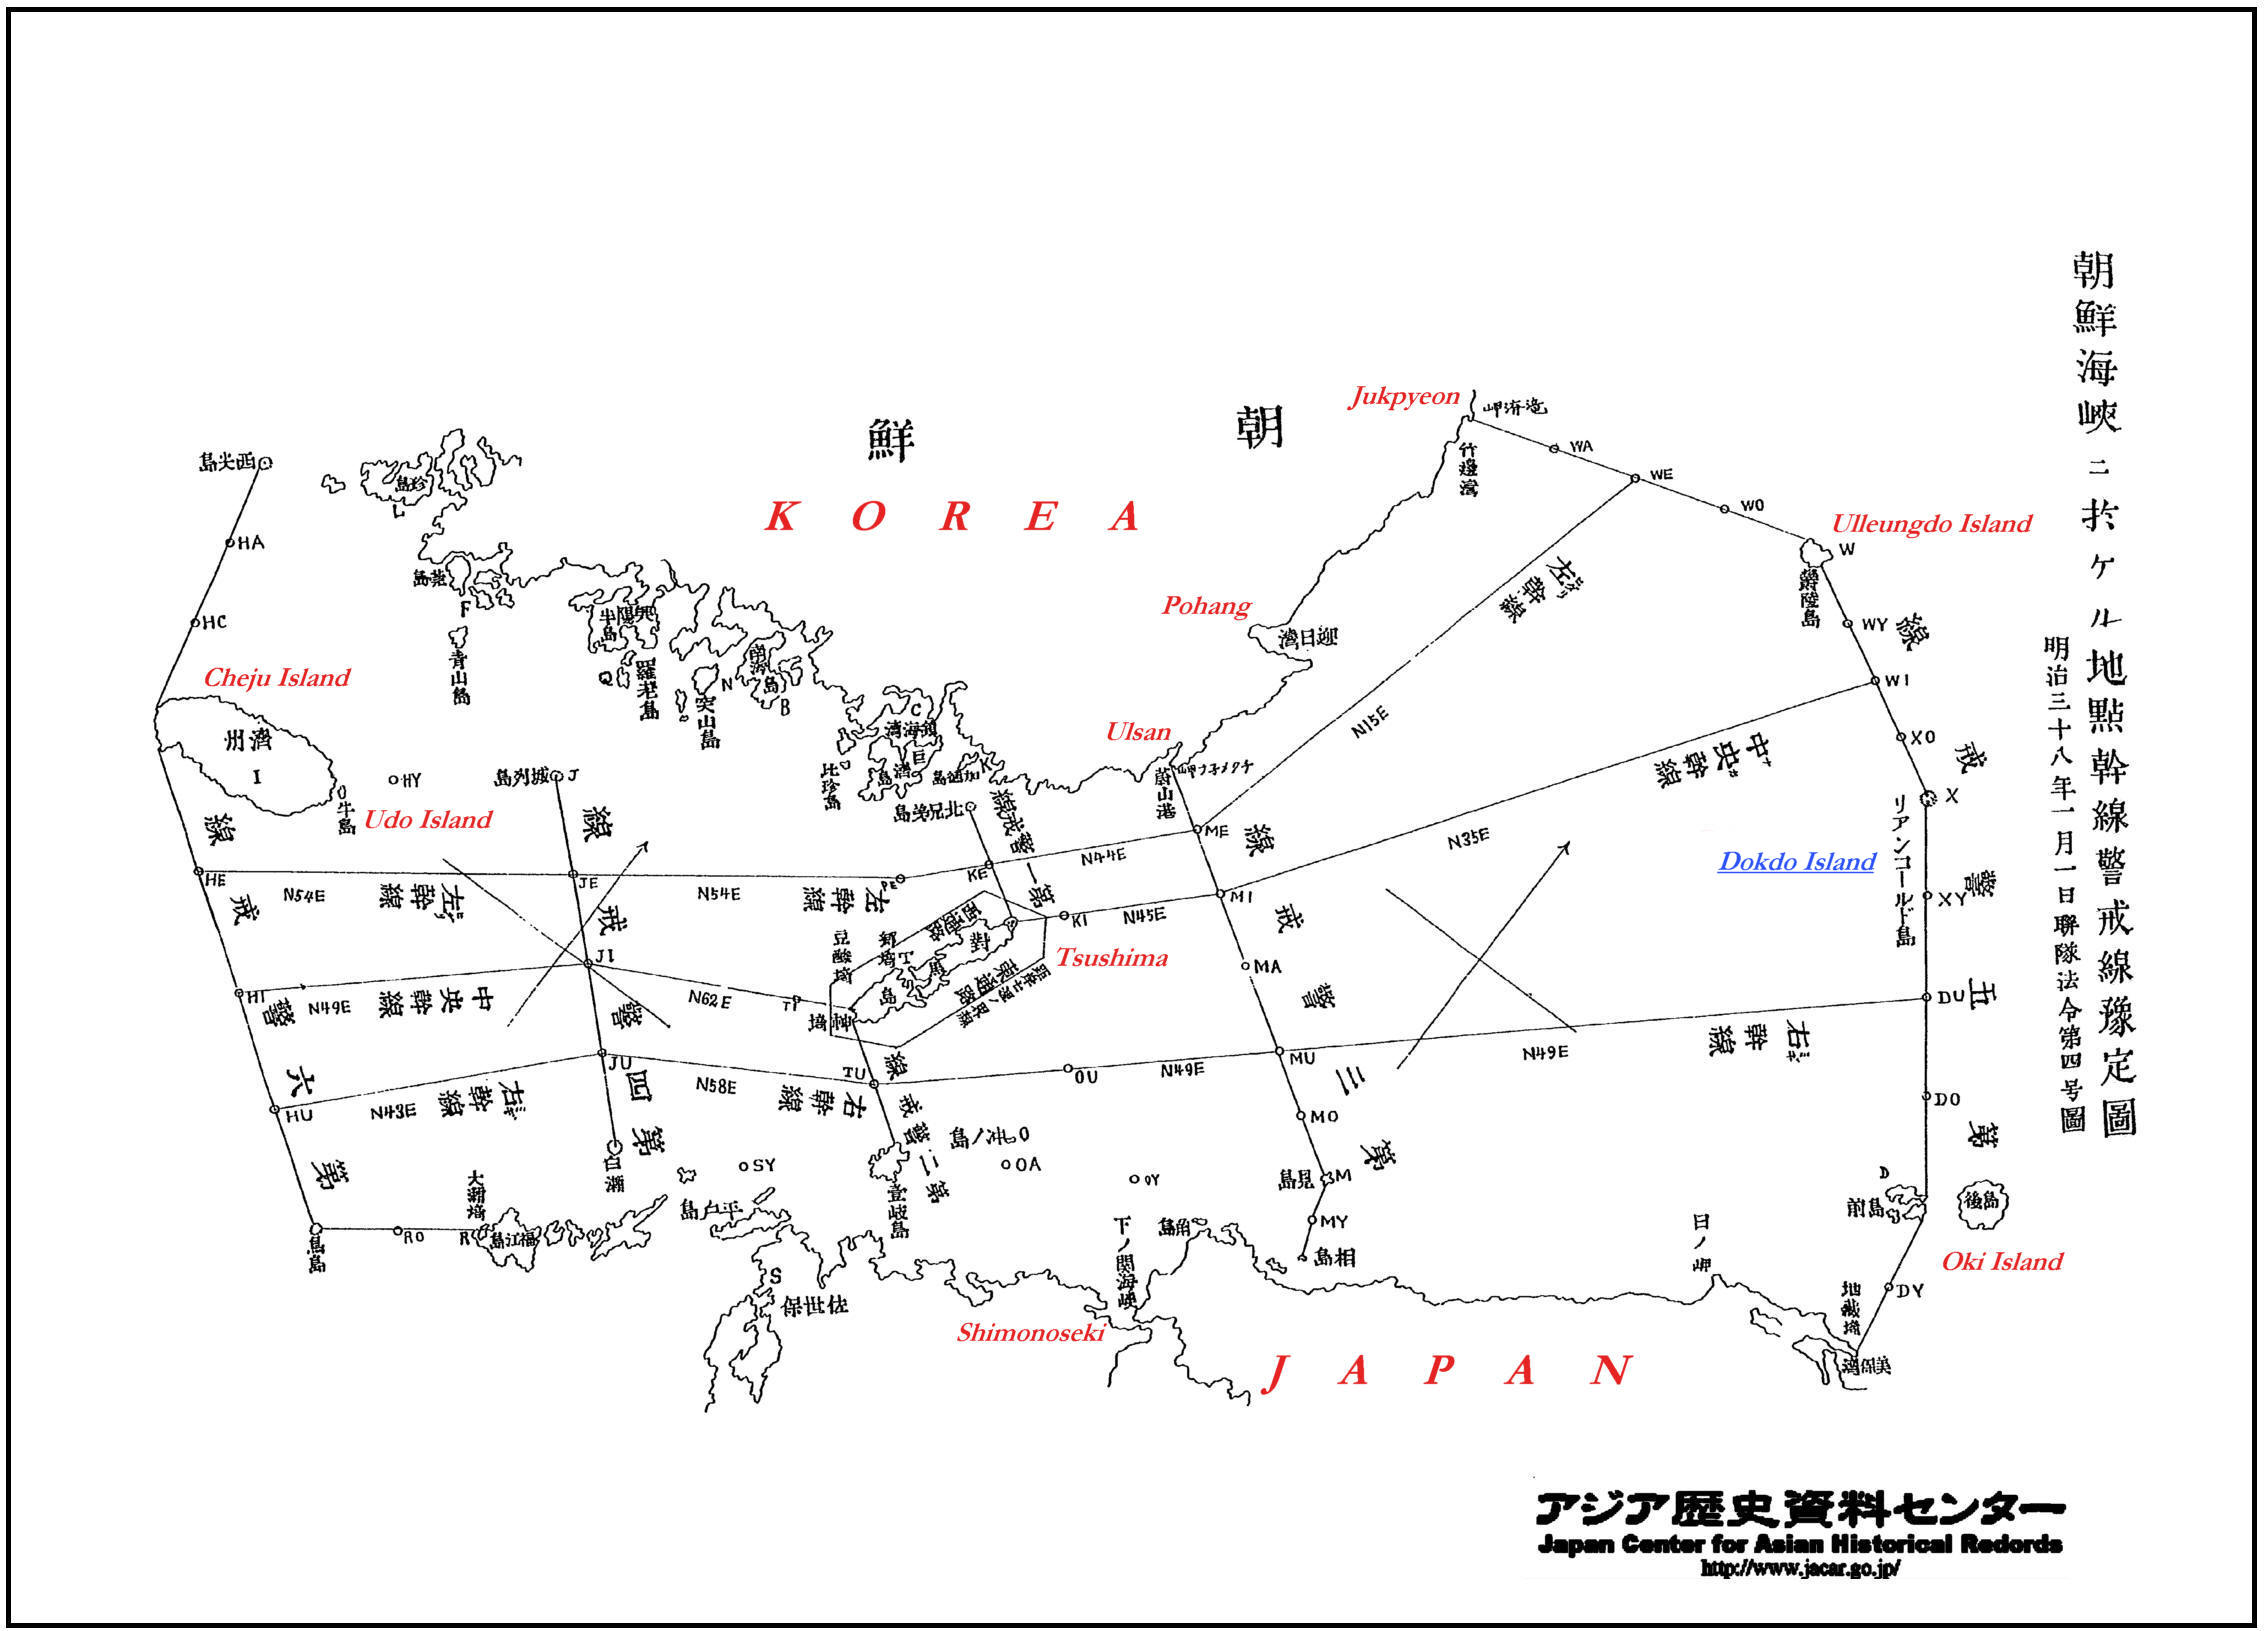 A Japanese naval map of the East Sea showing Dokdo was incorportated into Japan's warplan before they annexed the islets